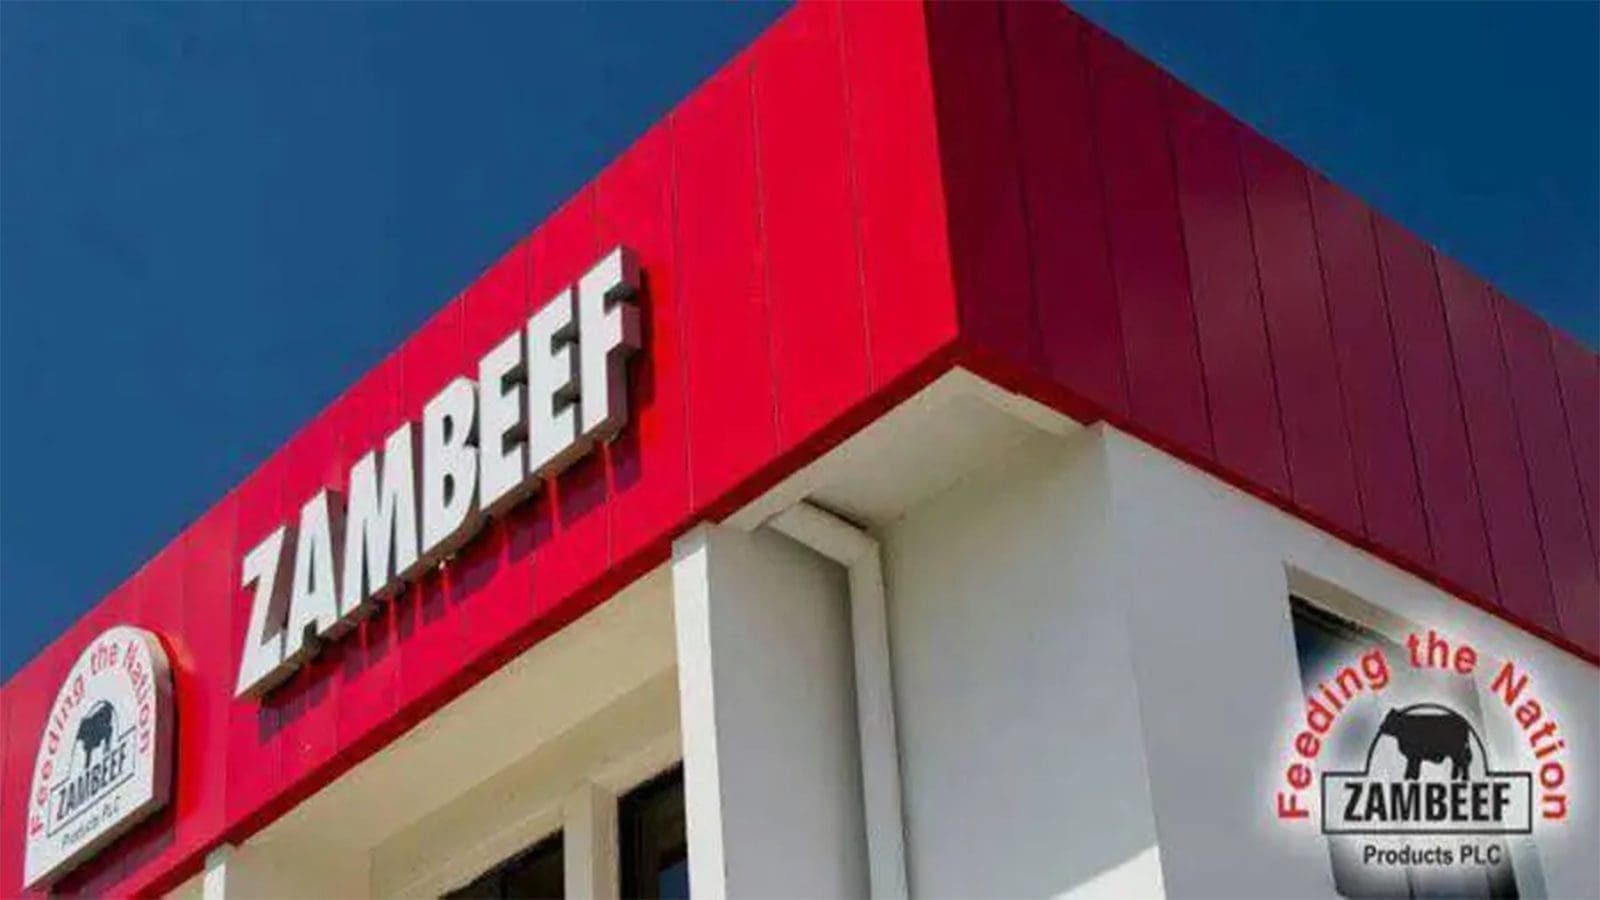 Zambeef Products eyes new markets with new ISO 22000 Certification